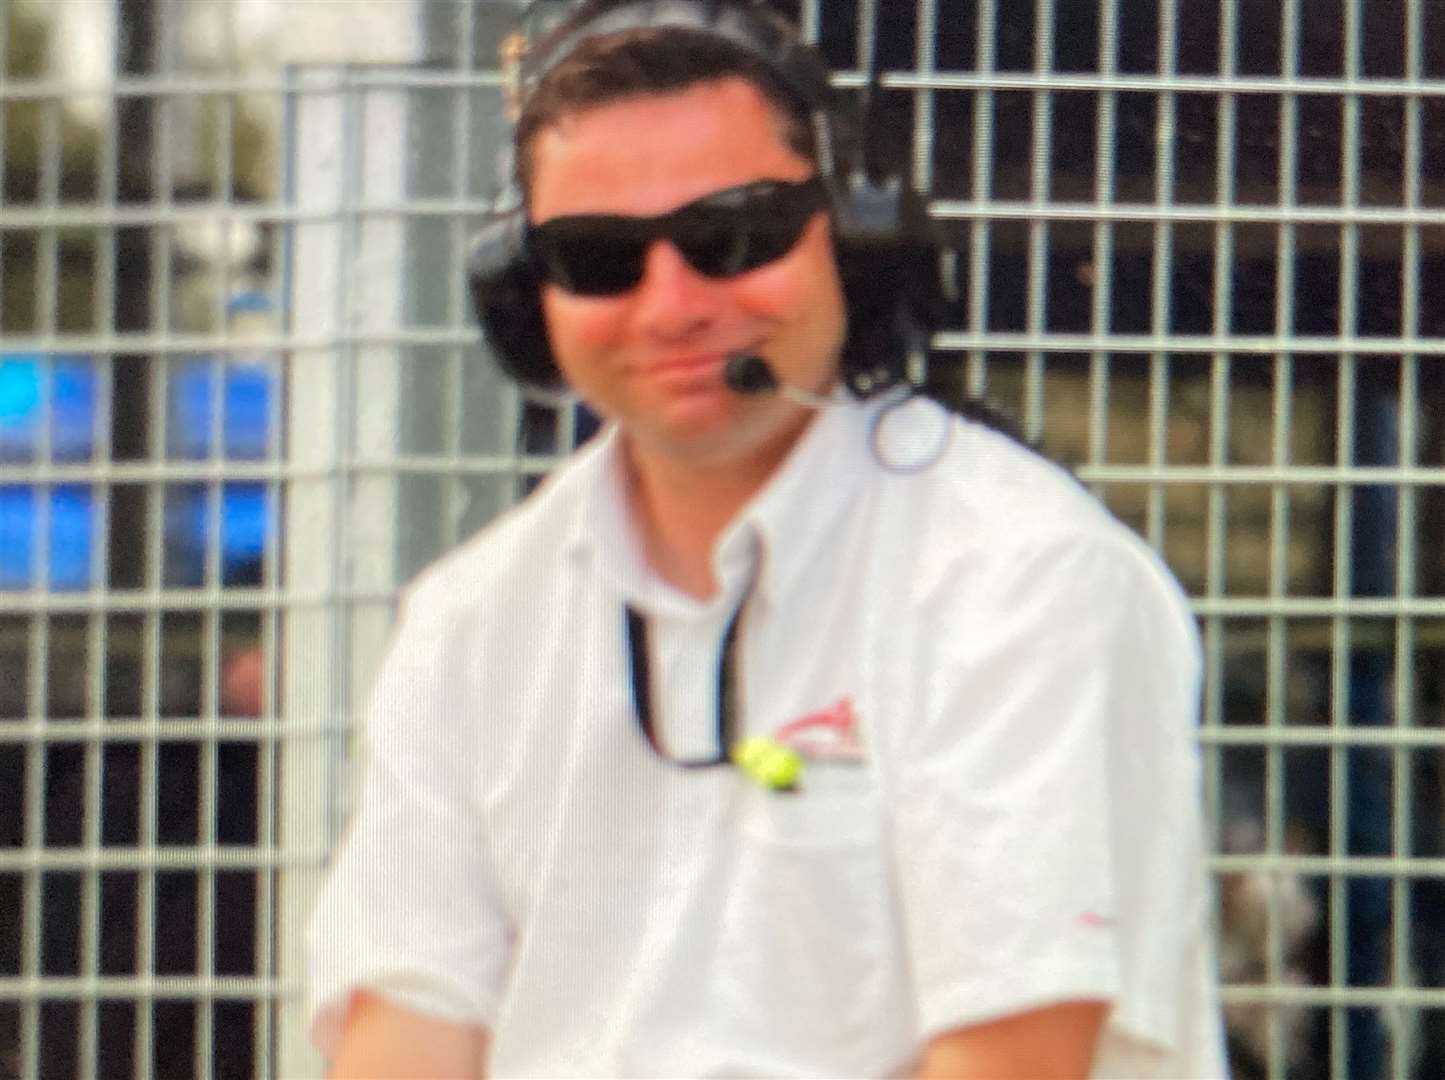 Goudhurst's Simon Hill, whose son Jake races in the BTCC, drove the A1 pace car and later became the championship's TV pitlane reporter. He's pictured here prior to the Durban race in South Africa in February 2007